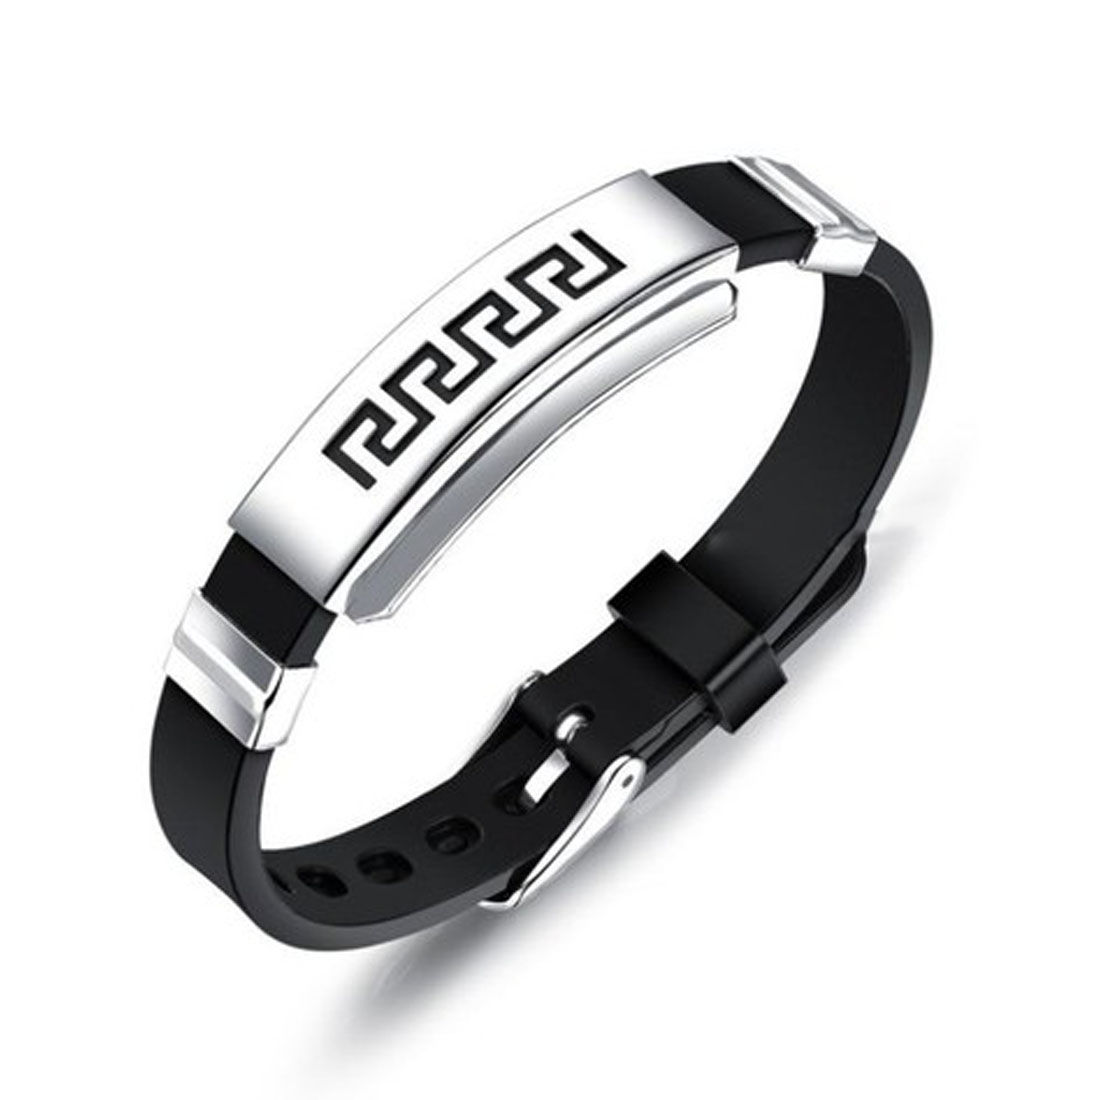 Details about   Mens stainless steel/black steel bracelet,high quality,fits wrist 20.5 cm